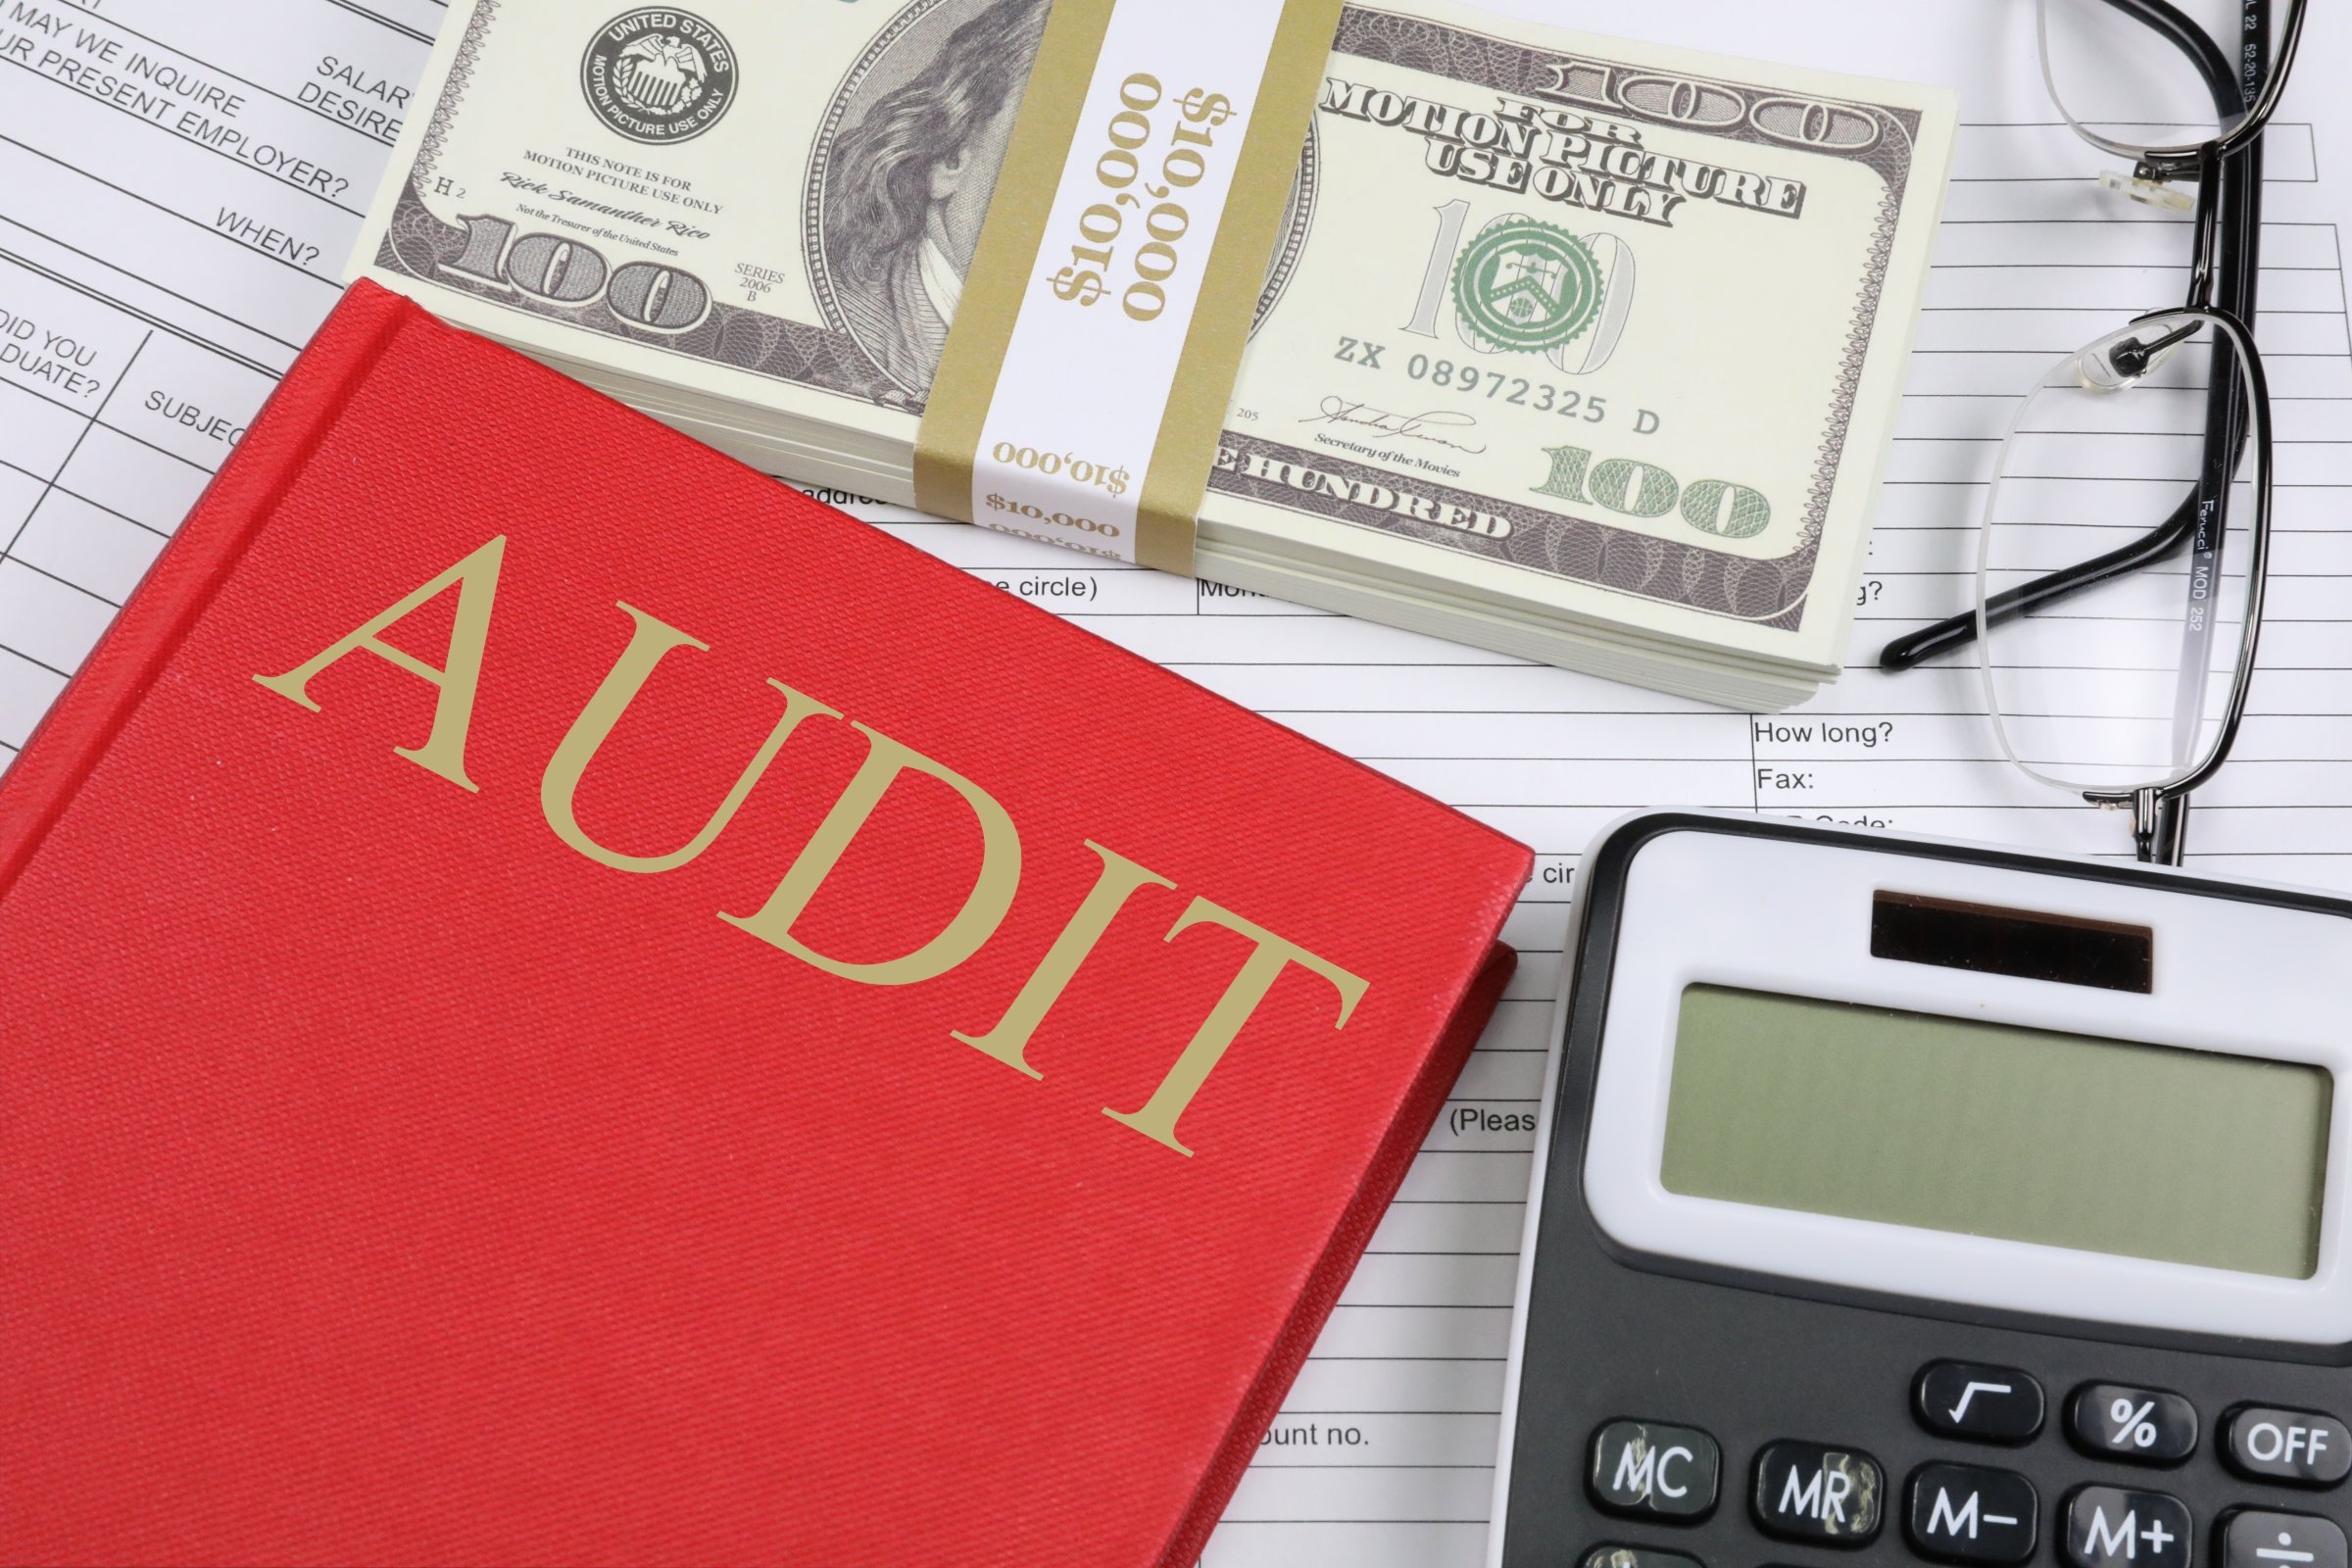 ISA 700 The Auditor's Report on Financial Statements